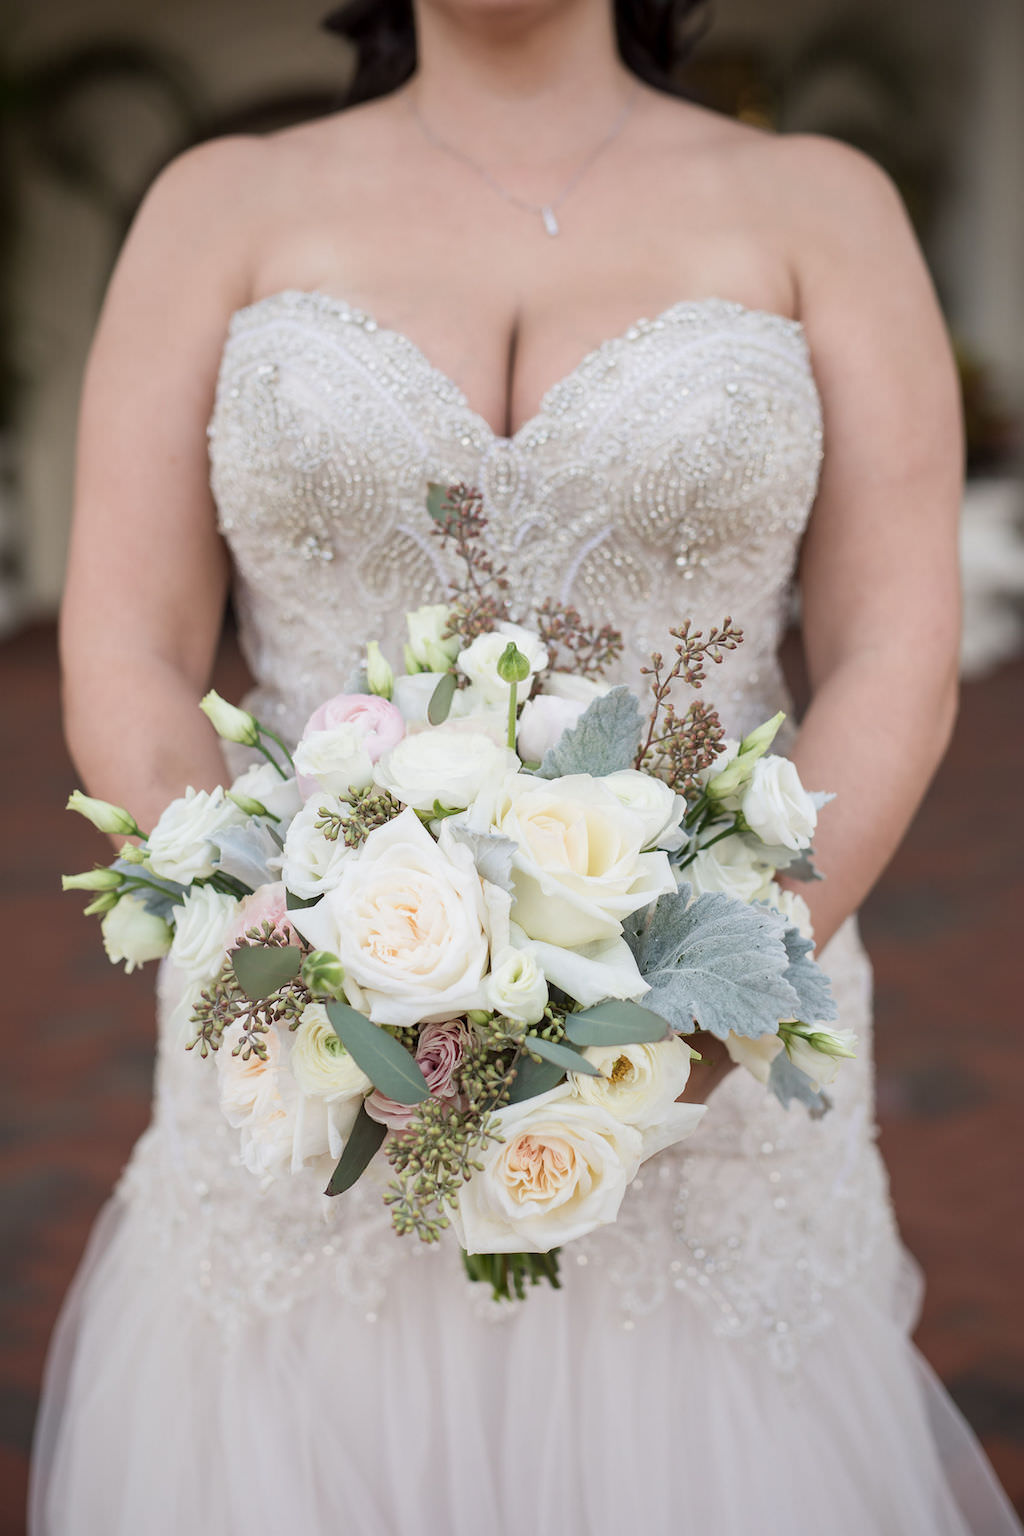 Tampa Bay Bride Holding Organic Ivory, Blush Pink Rose Florals and Dusty Miller Greenery Bouquet